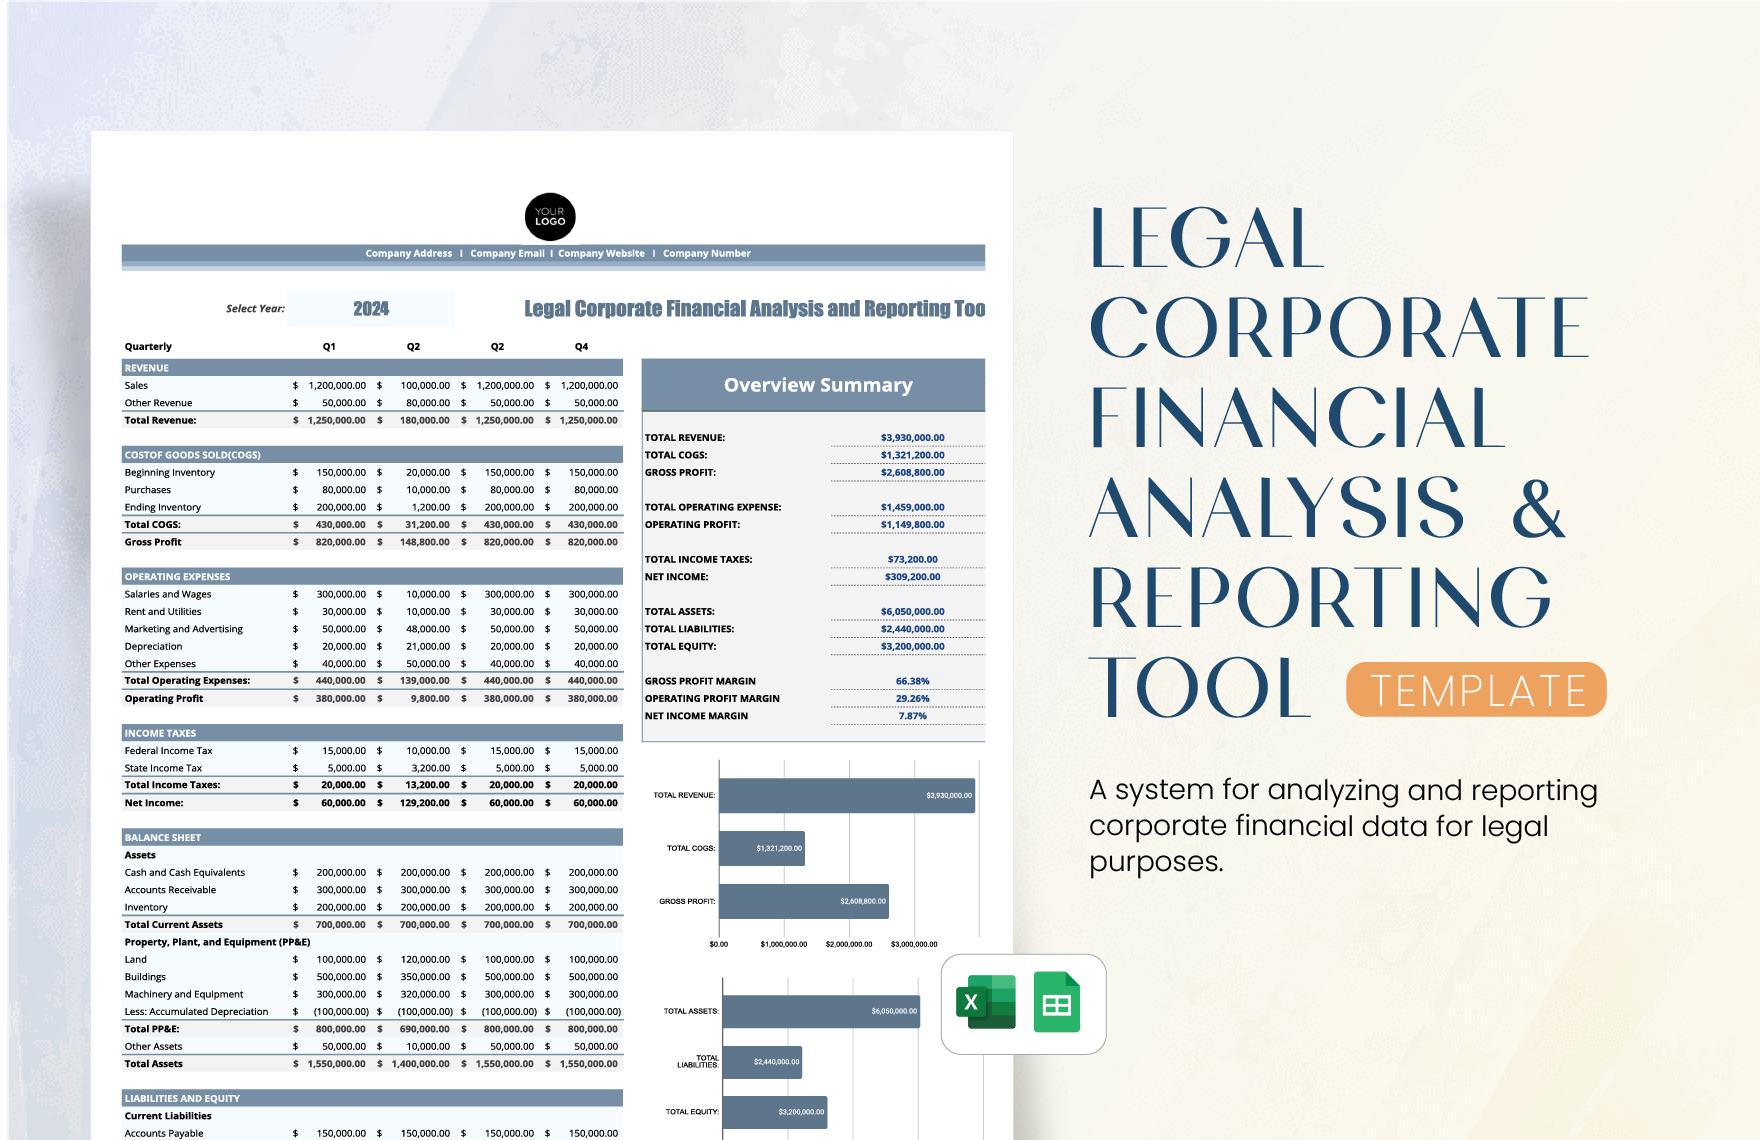 Legal Corporate Financial Analysis and Reporting Tool Template in Excel, Google Sheets